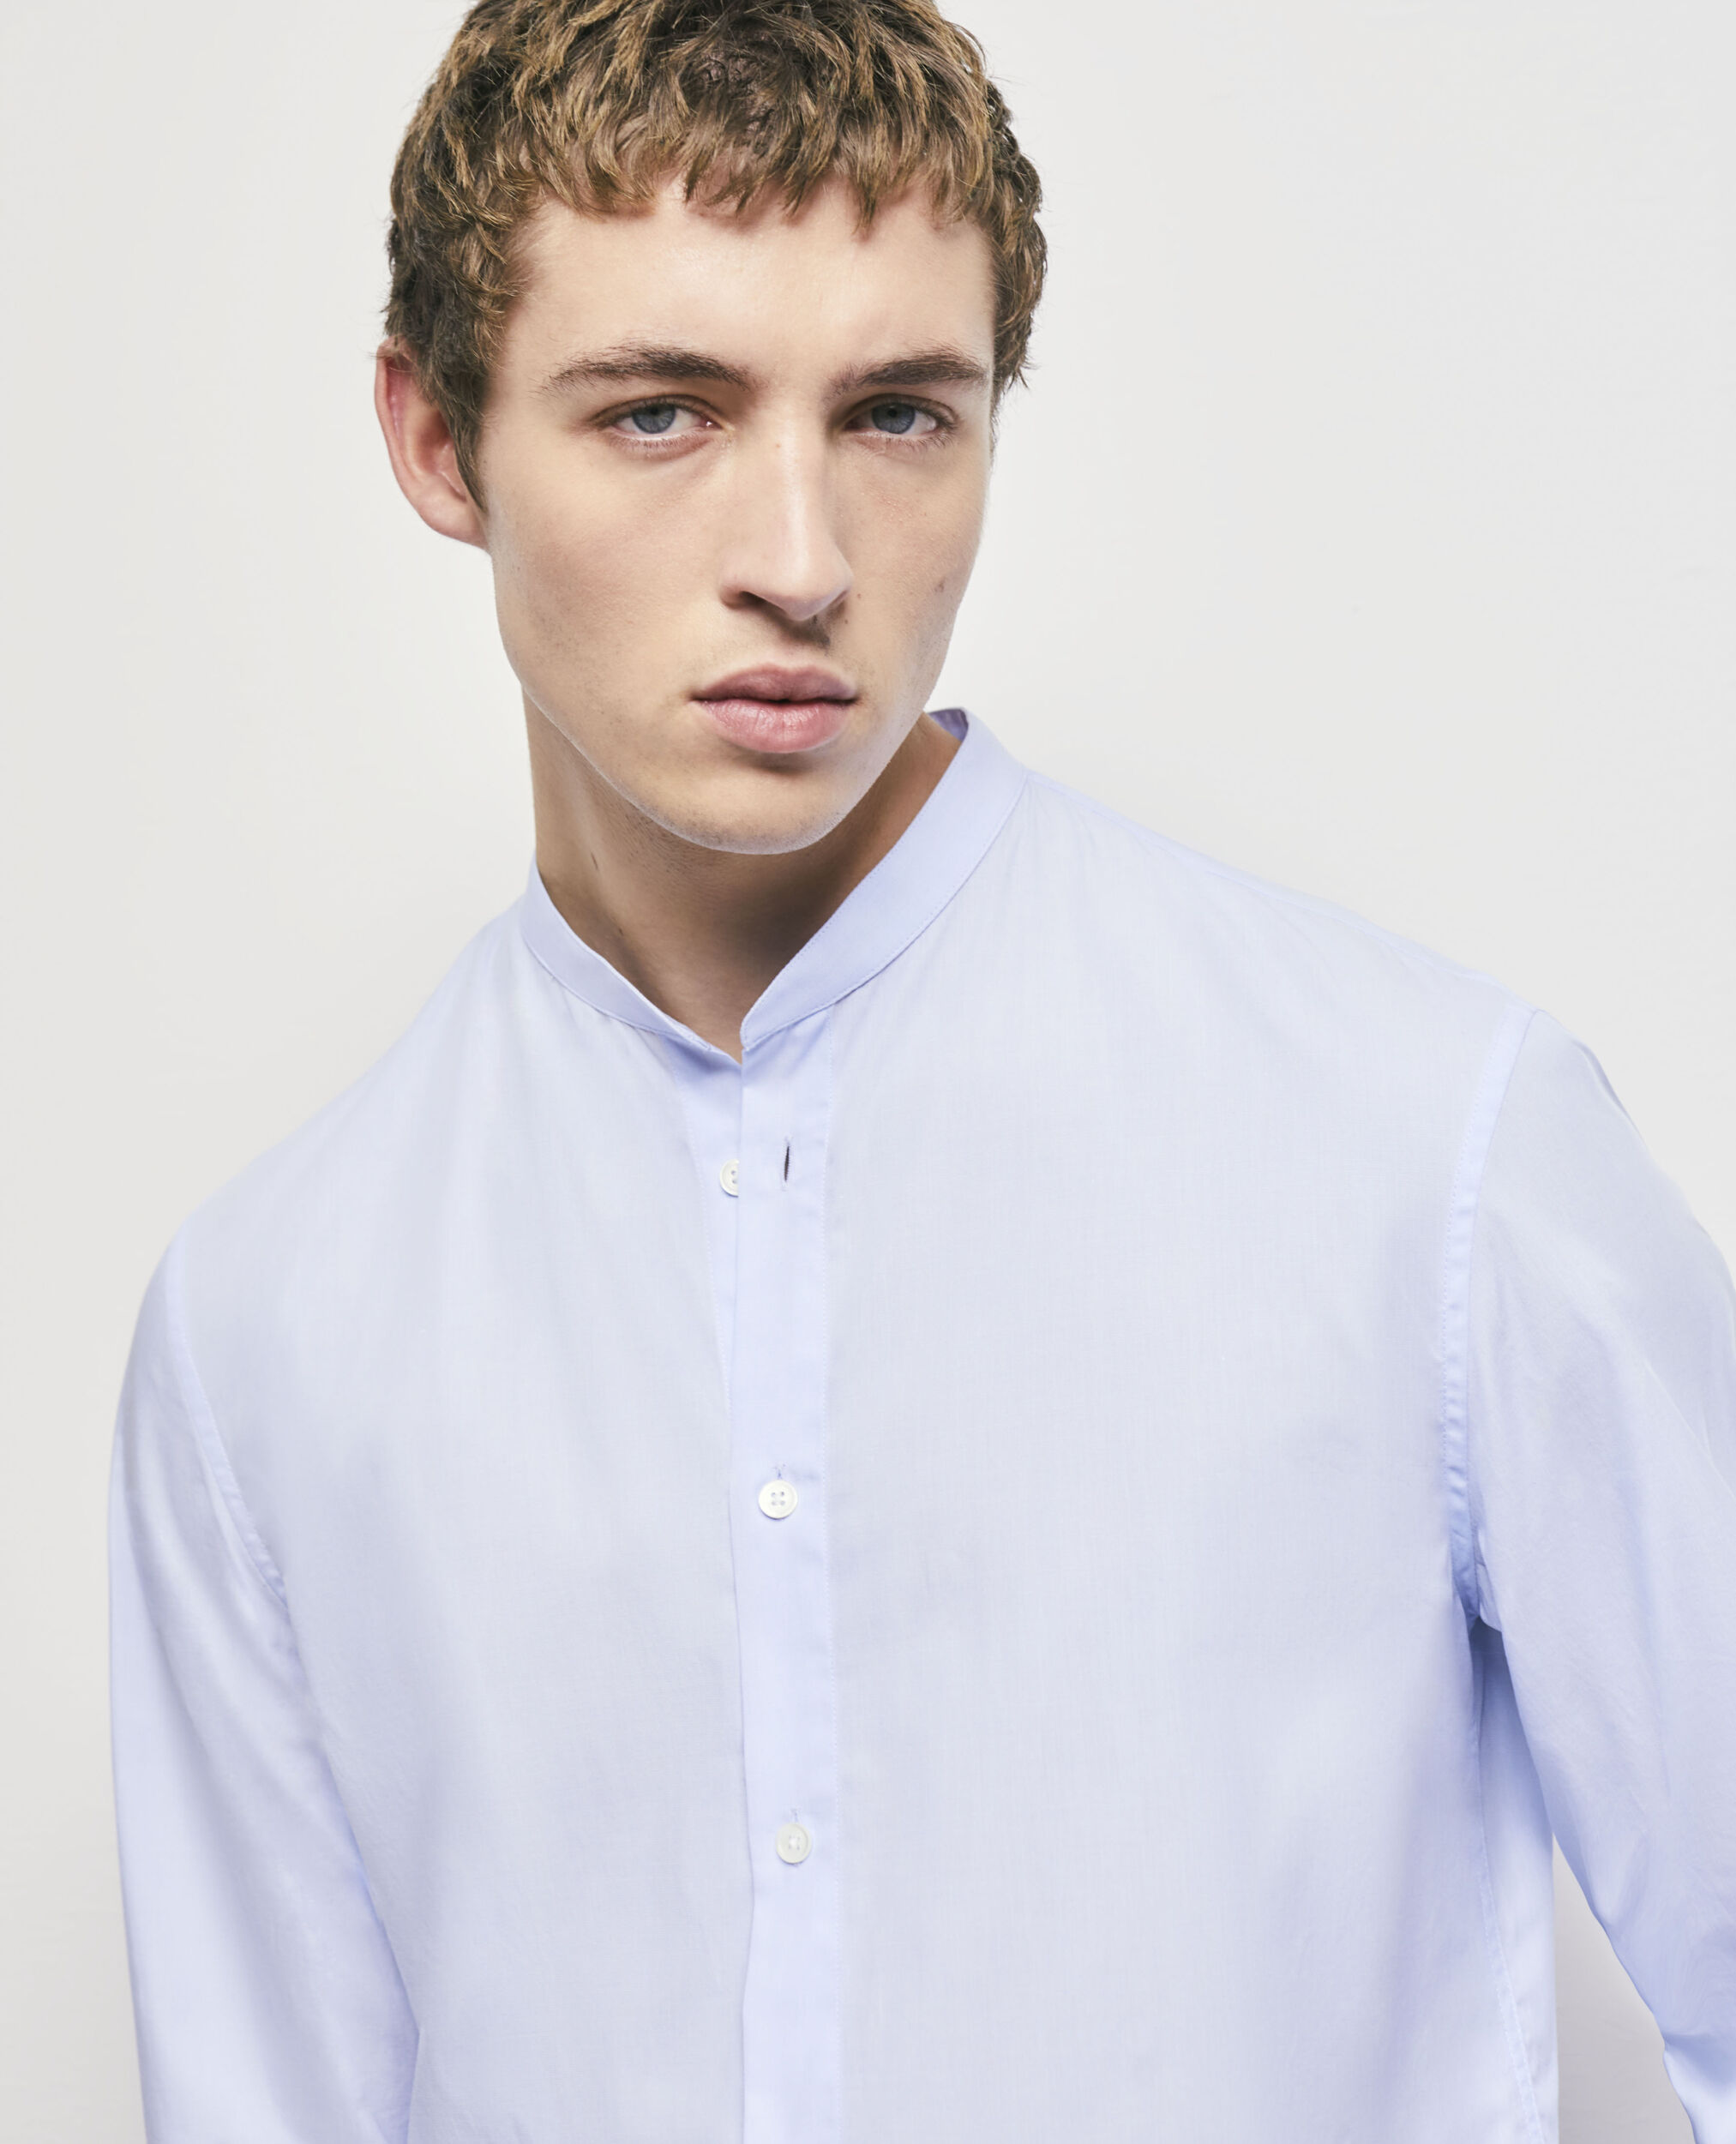 Blue shirt with officer collar | The Kooples - US